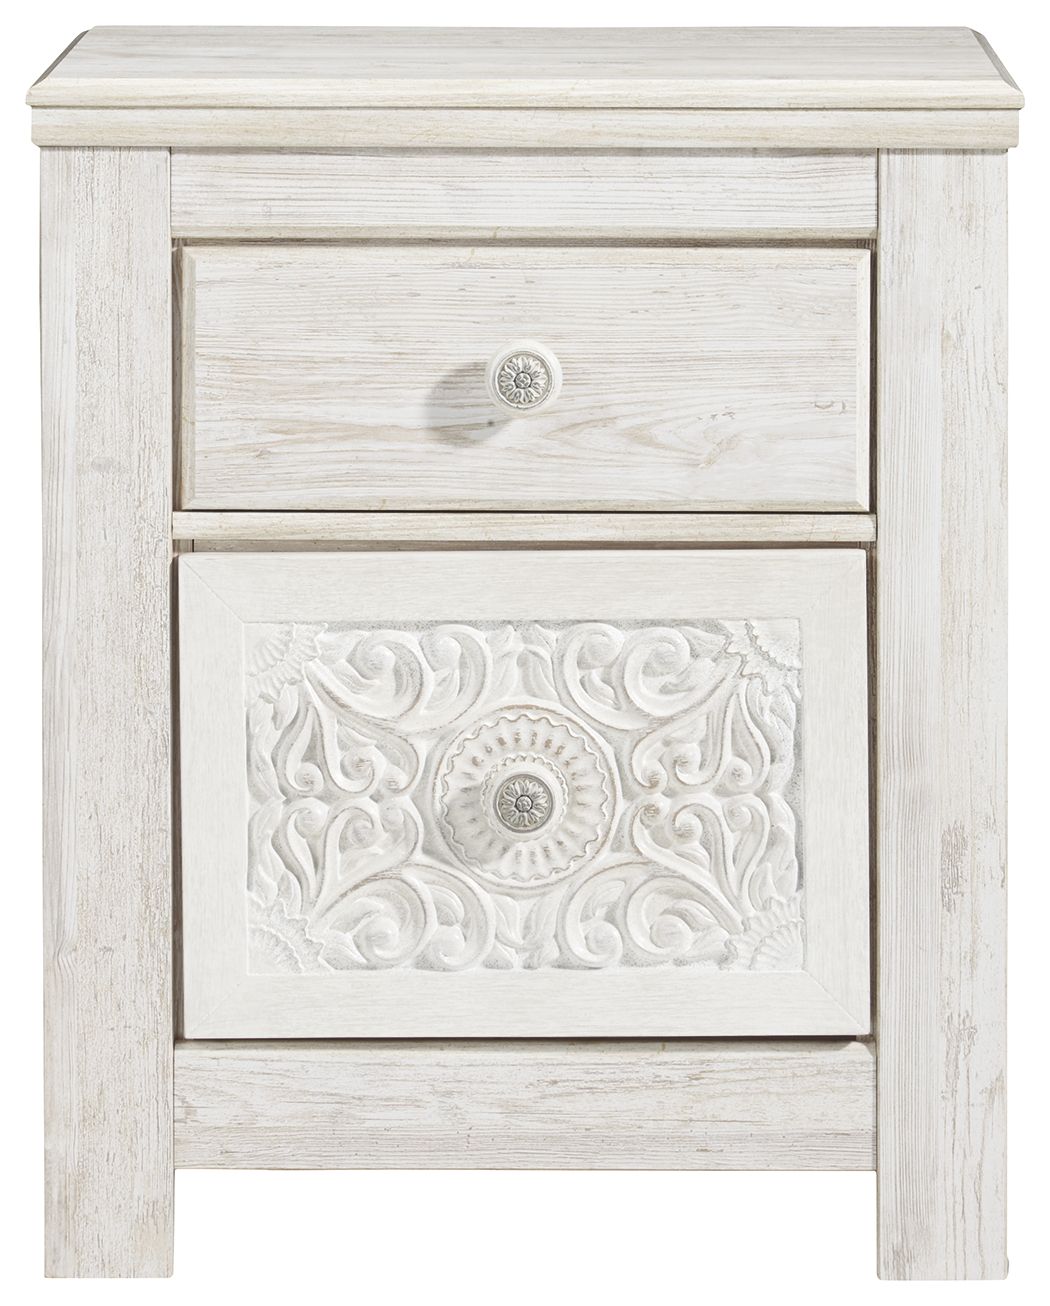 Paxberry - Whitewash - Two Drawer Night Stand - Tony's Home Furnishings